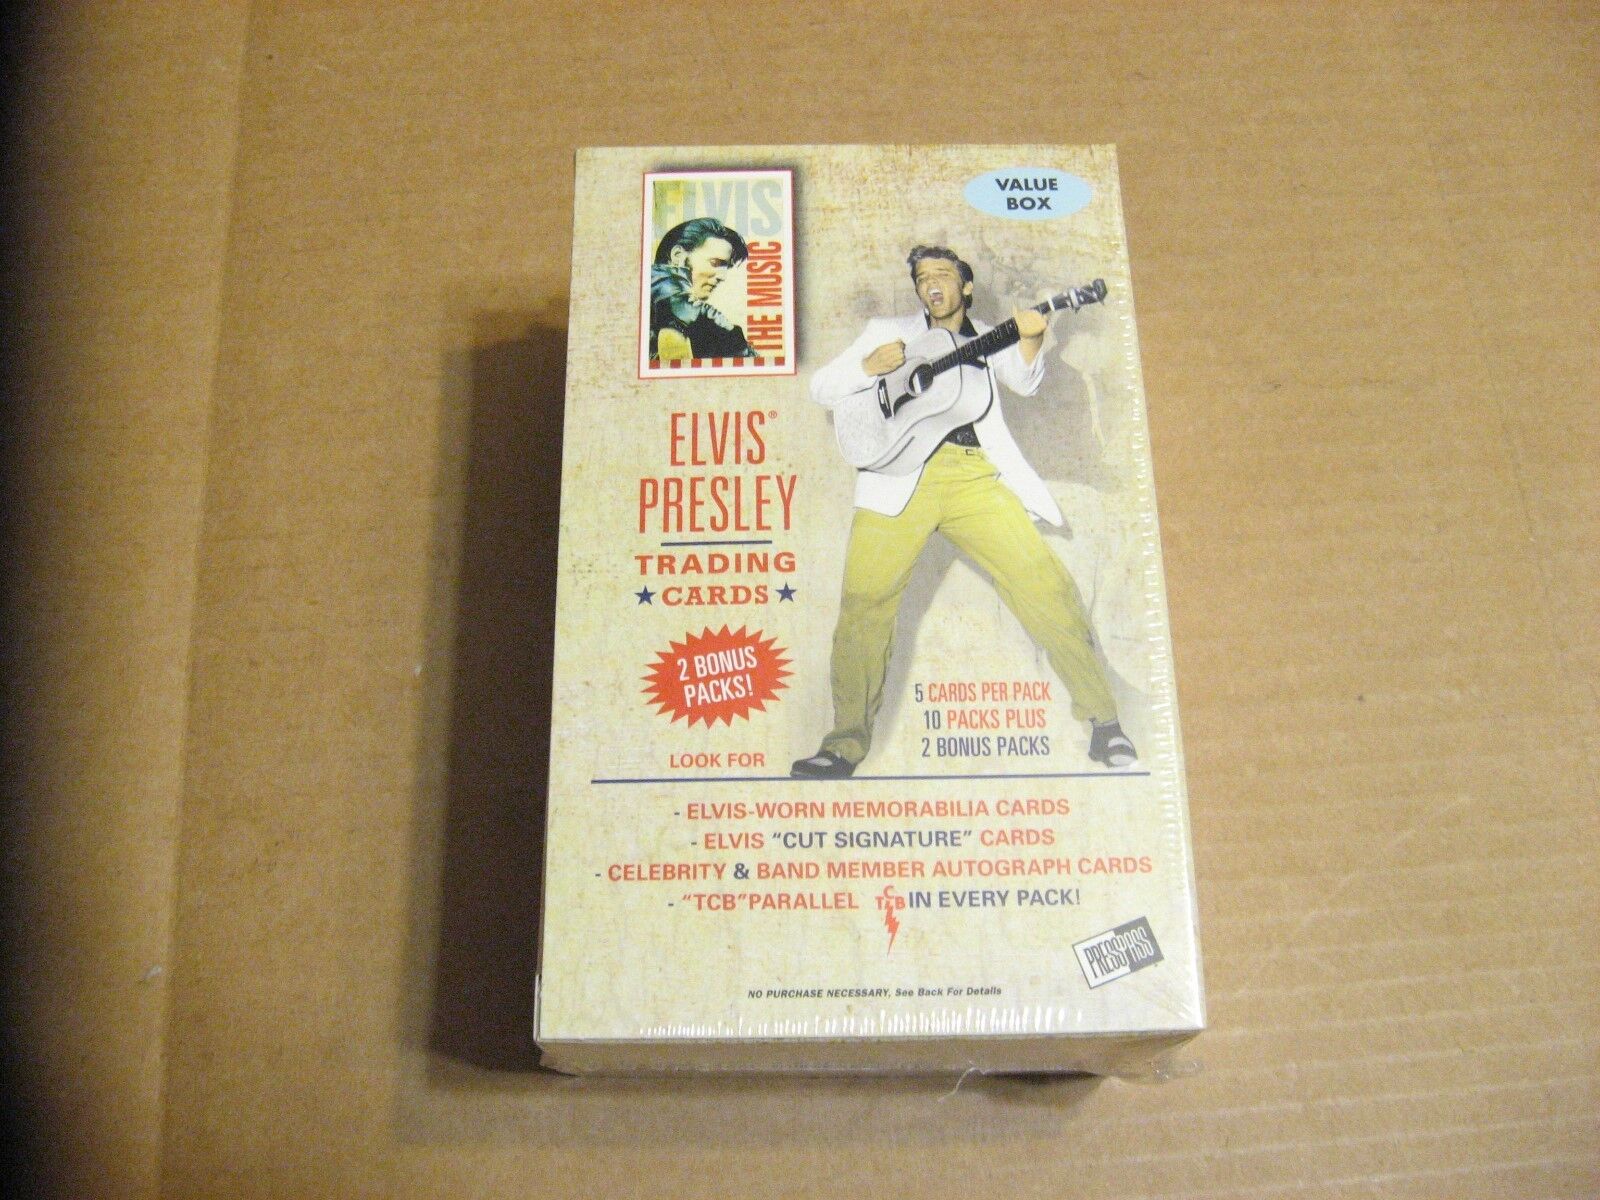 New ELVIS PRESLEY 2007 Press Pass Trading Cards 12 Pack Box Factory Sealed Nice